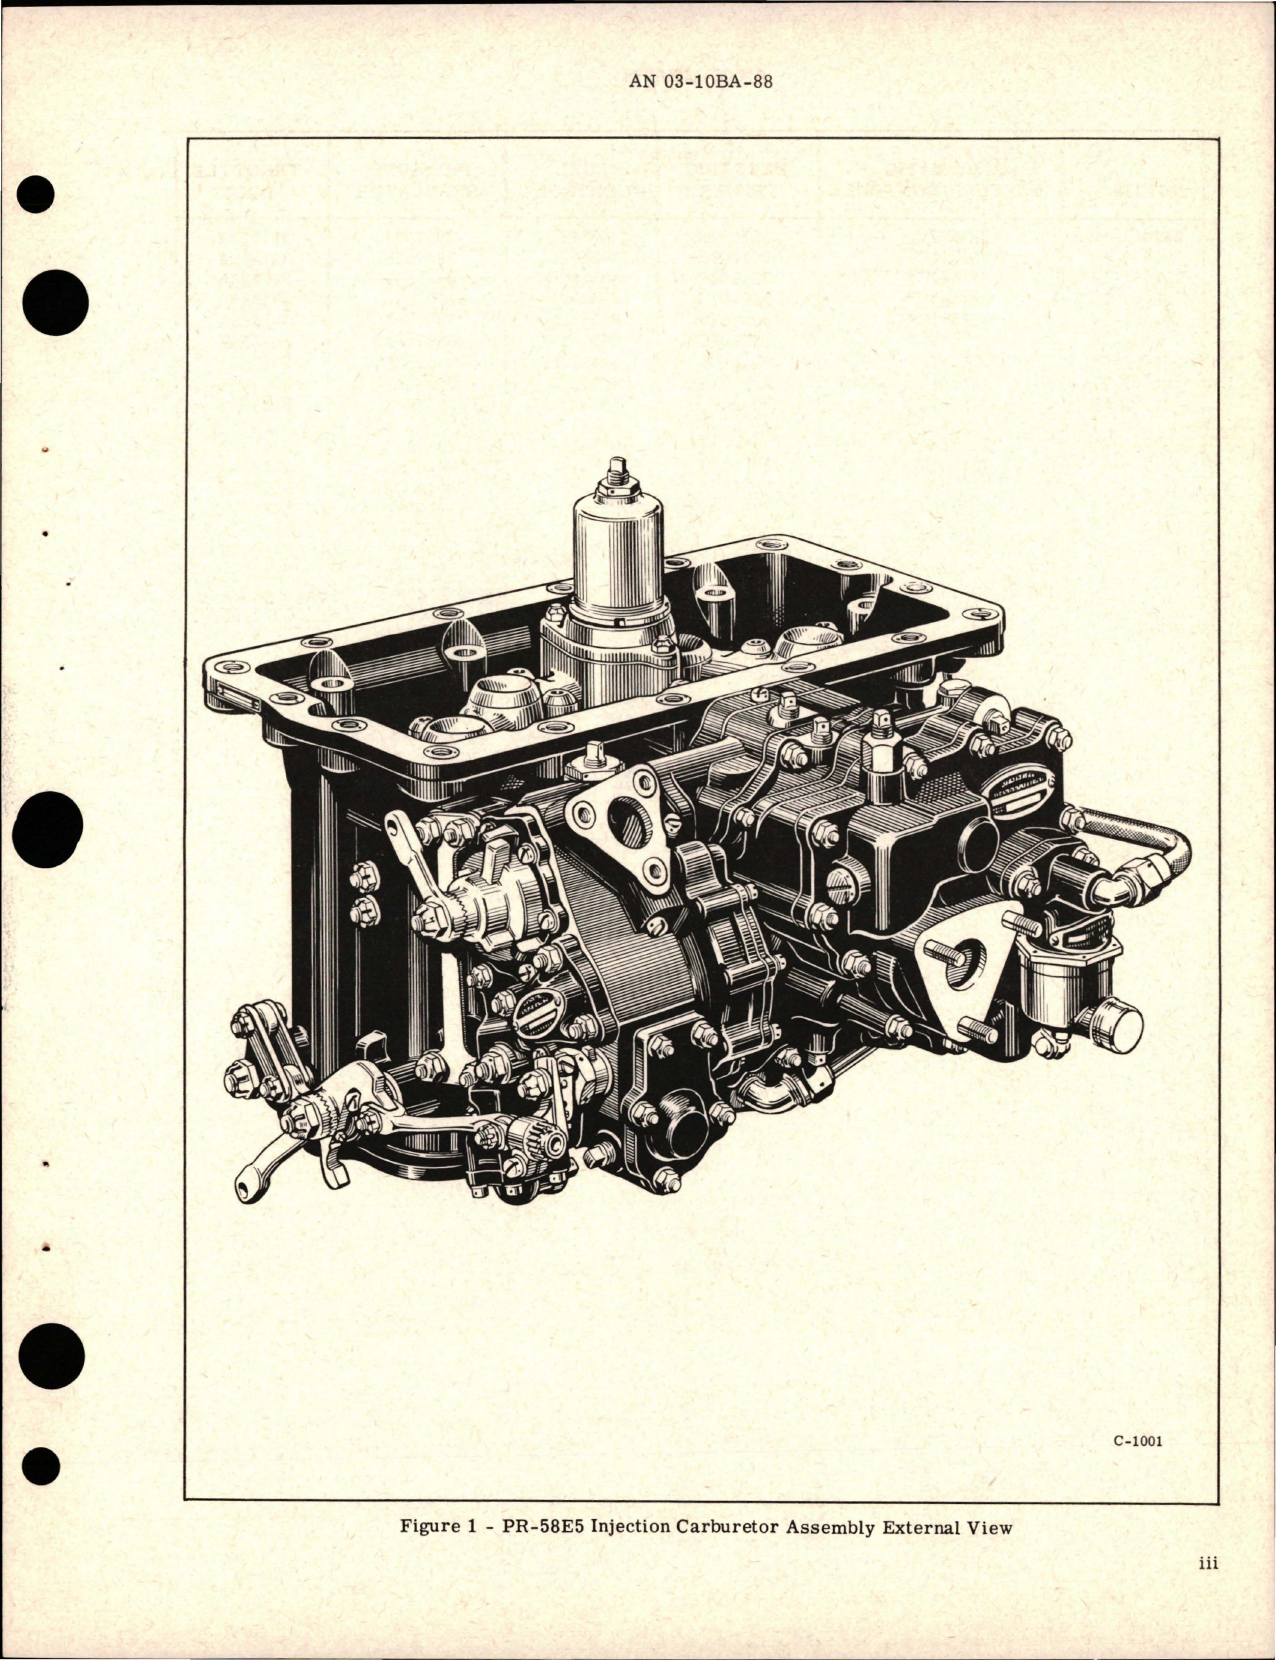 Sample page 5 from AirCorps Library document: Illustrated Parts Breakdown for Injection Carburetor - Model PR-58E5 